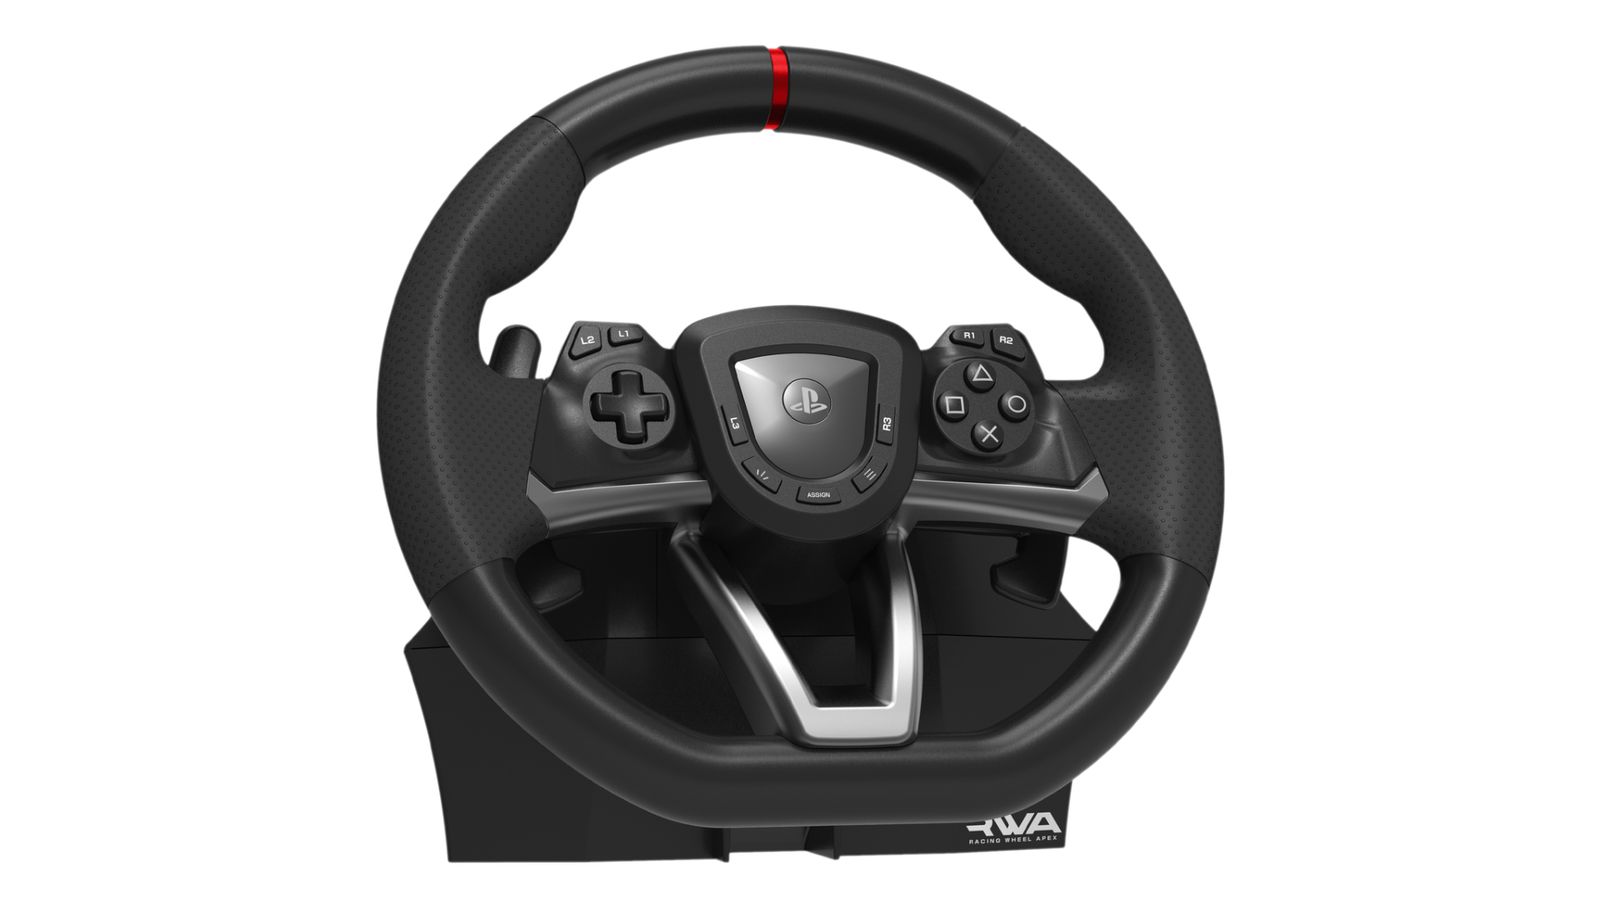 Hori Racing Wheel Apex product image of a black racing wheel with a red centre line at the top of the wheel.